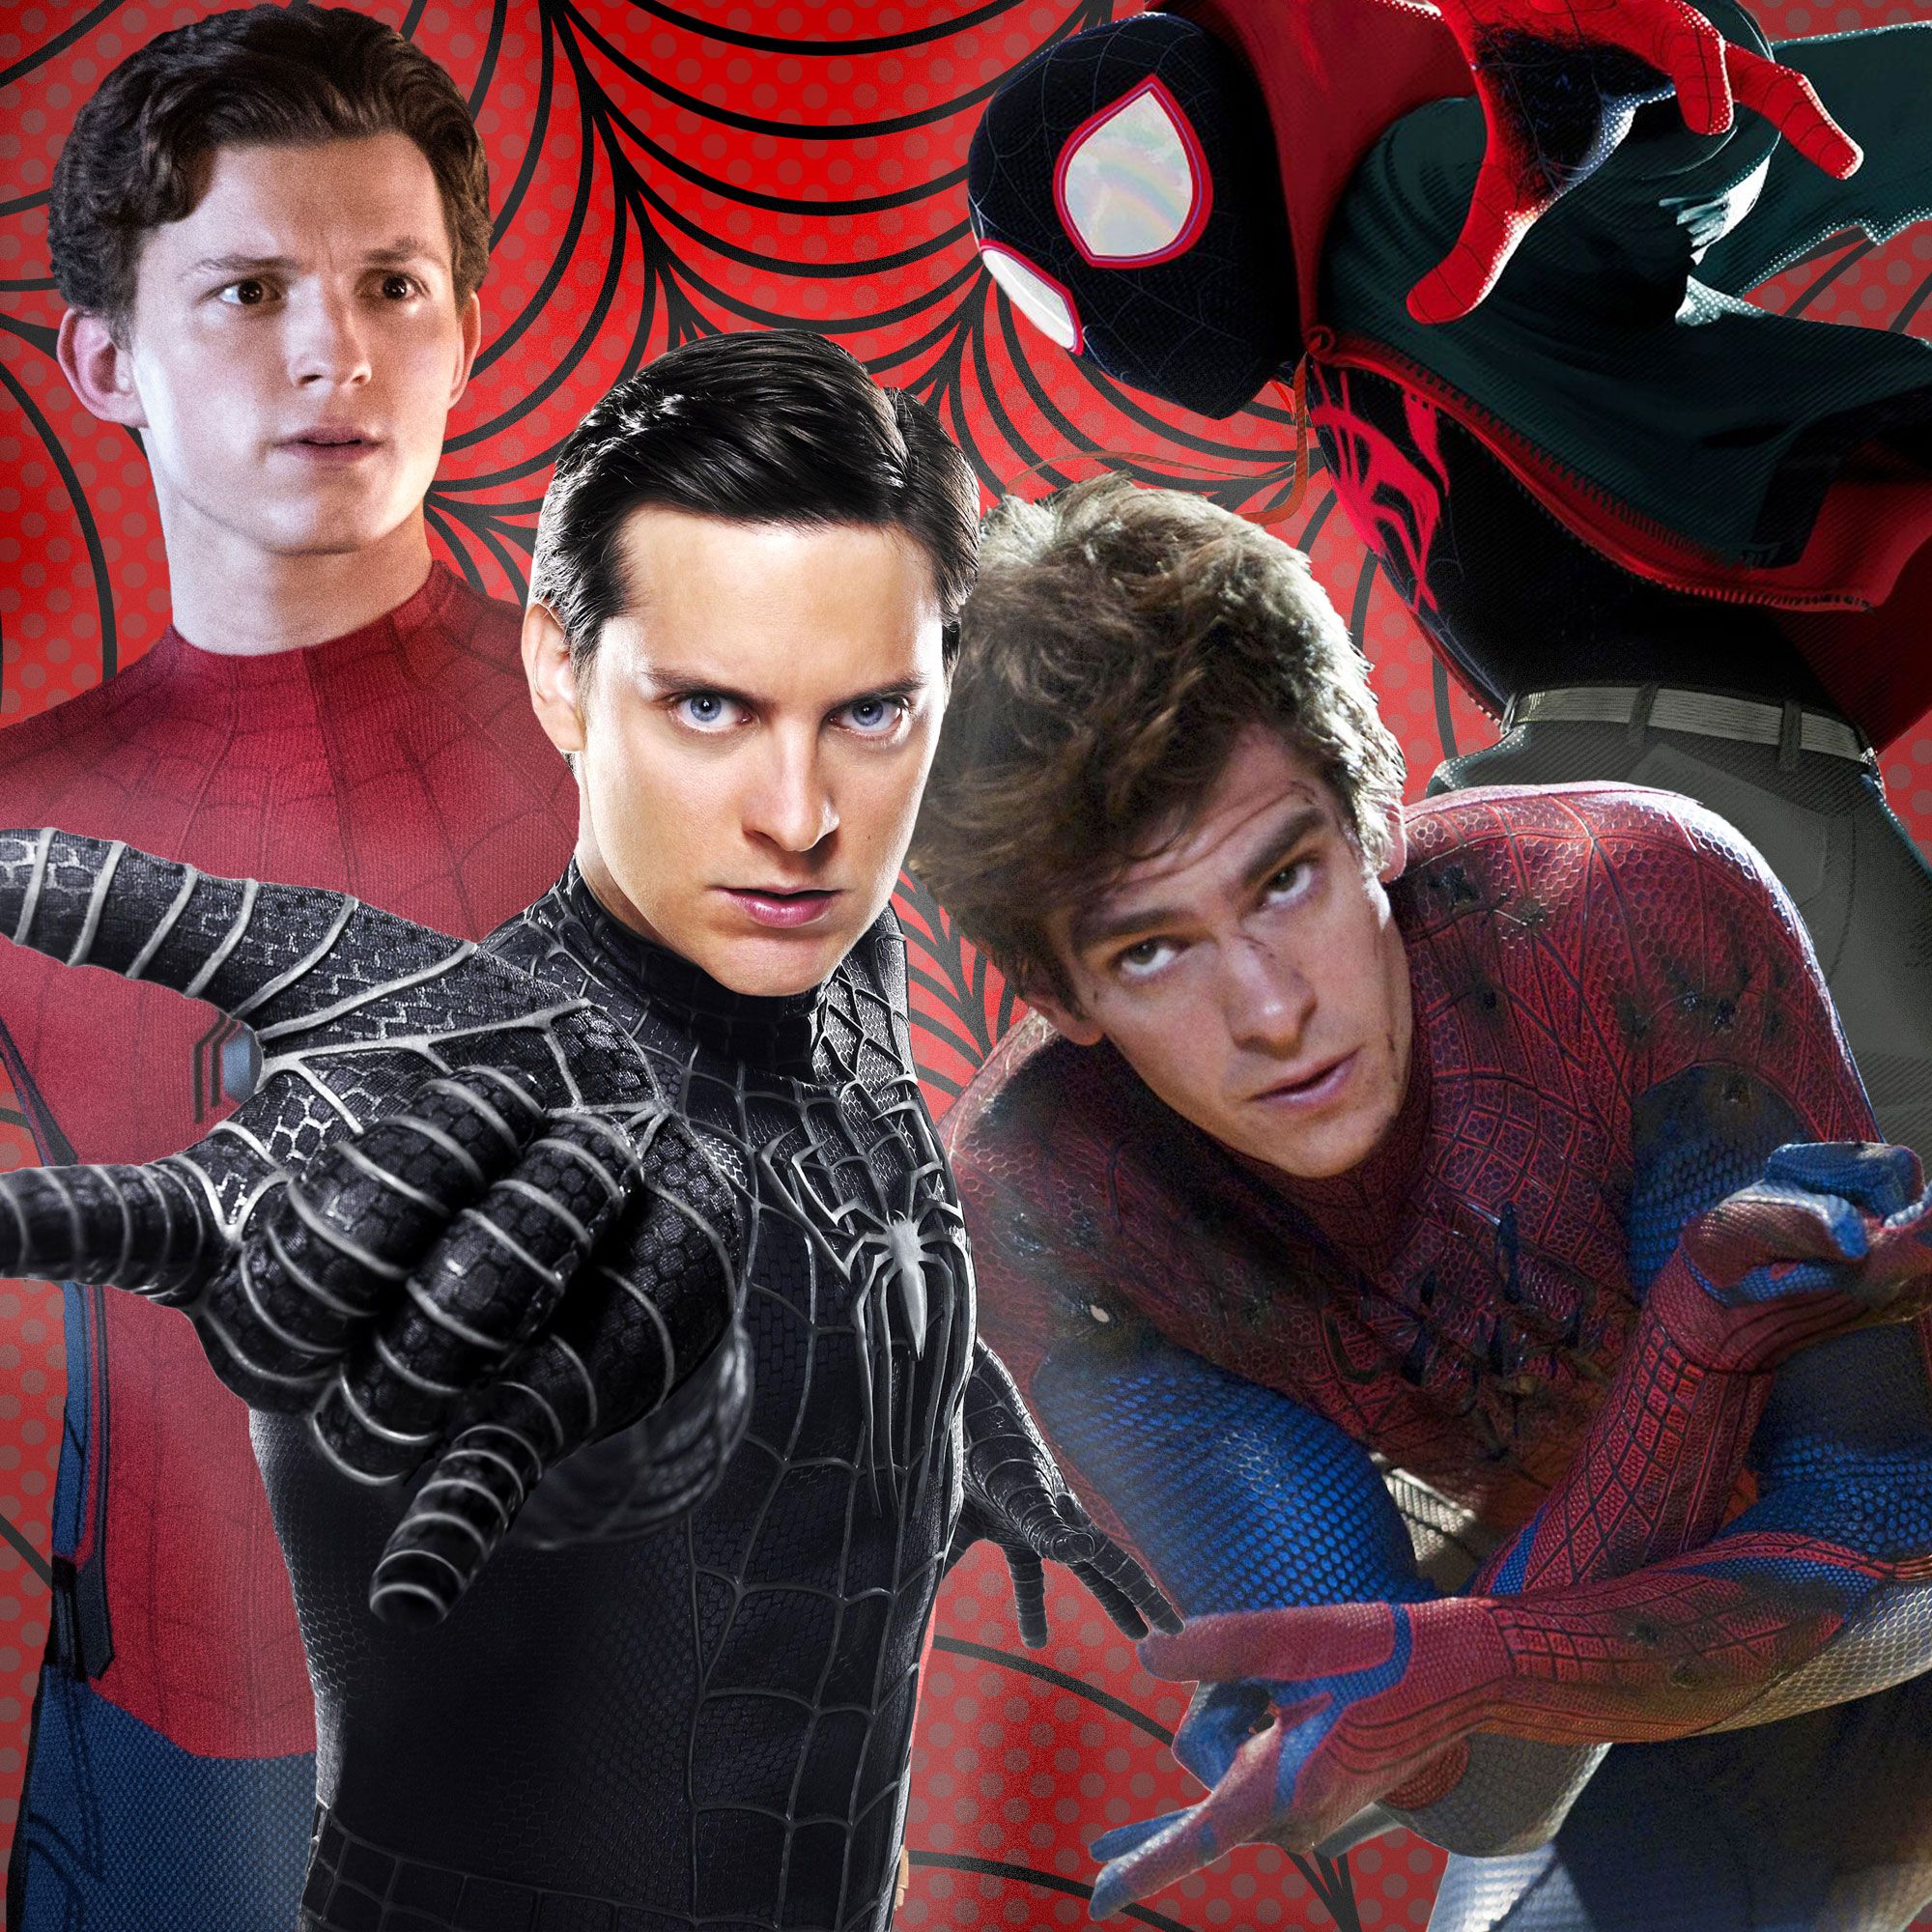 Film Review: The Amazing Spider-Man starring Andrew Garfield